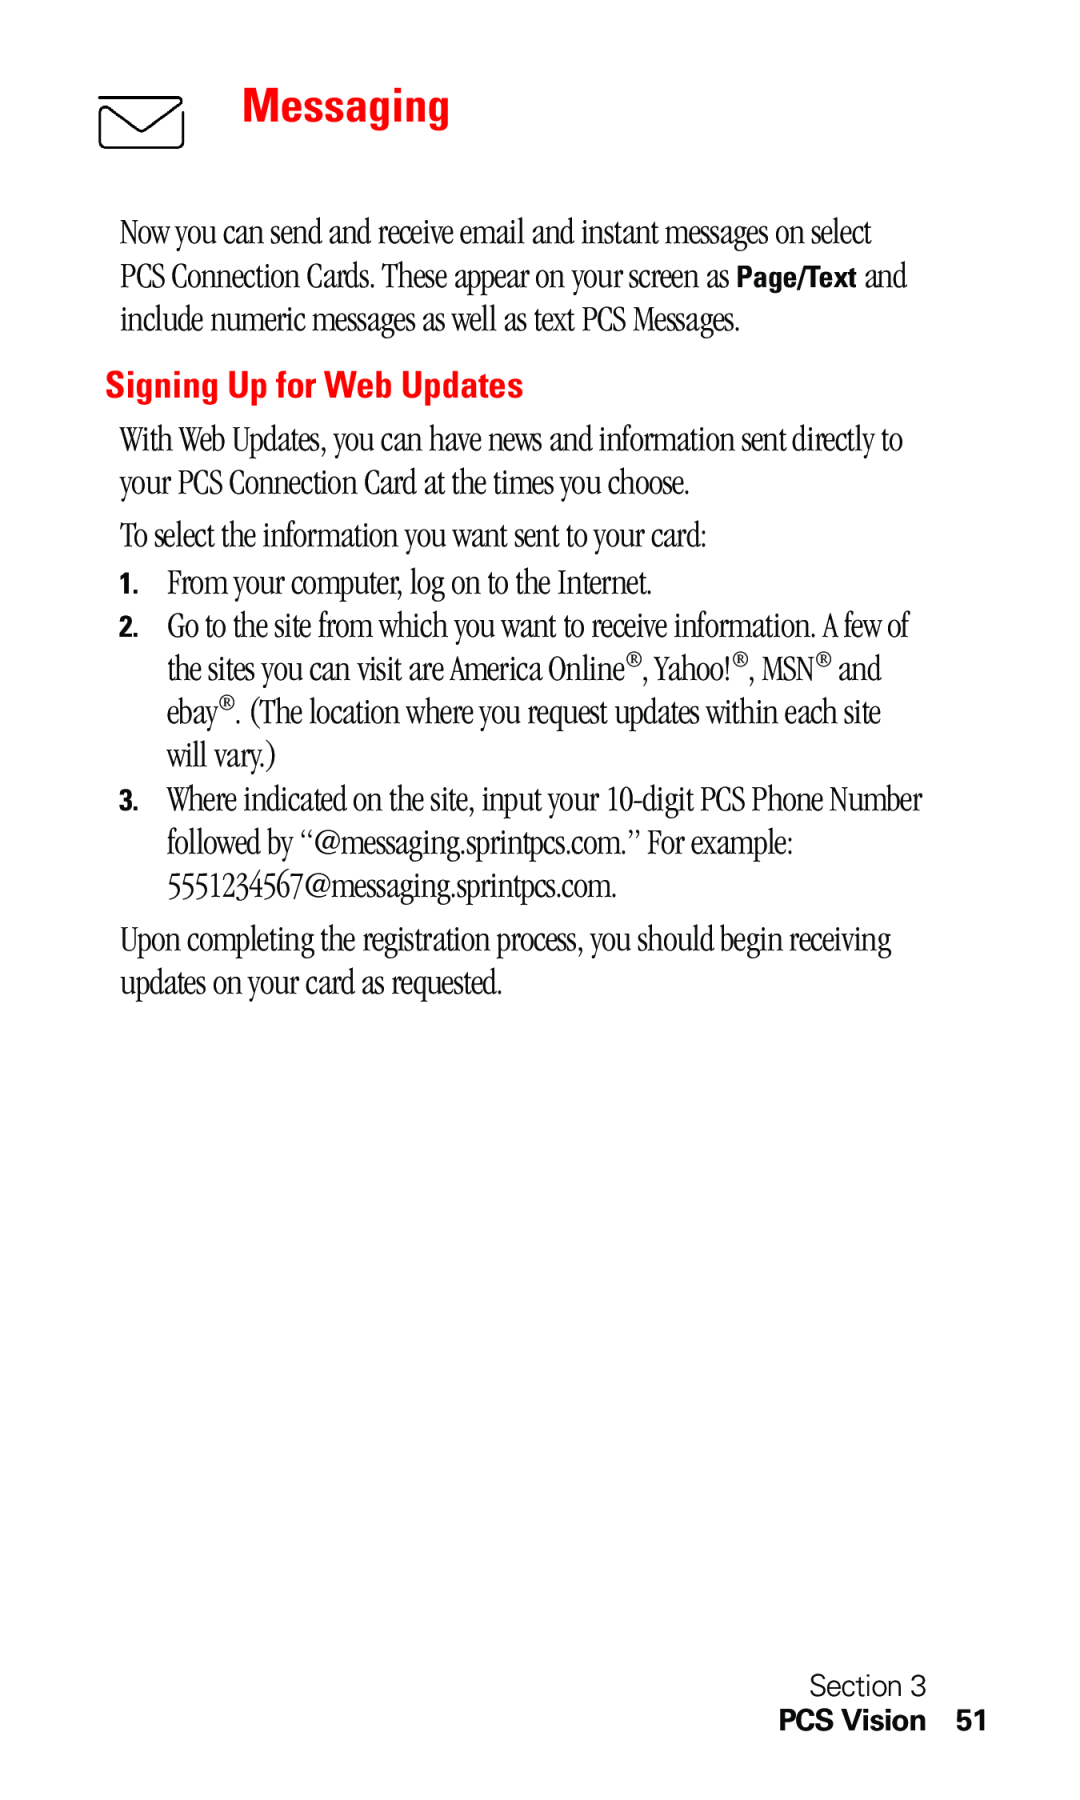 Sprint Nextel C201 manual Messaging, Signing Up for Web Updates, To select the information you want sent to your card 